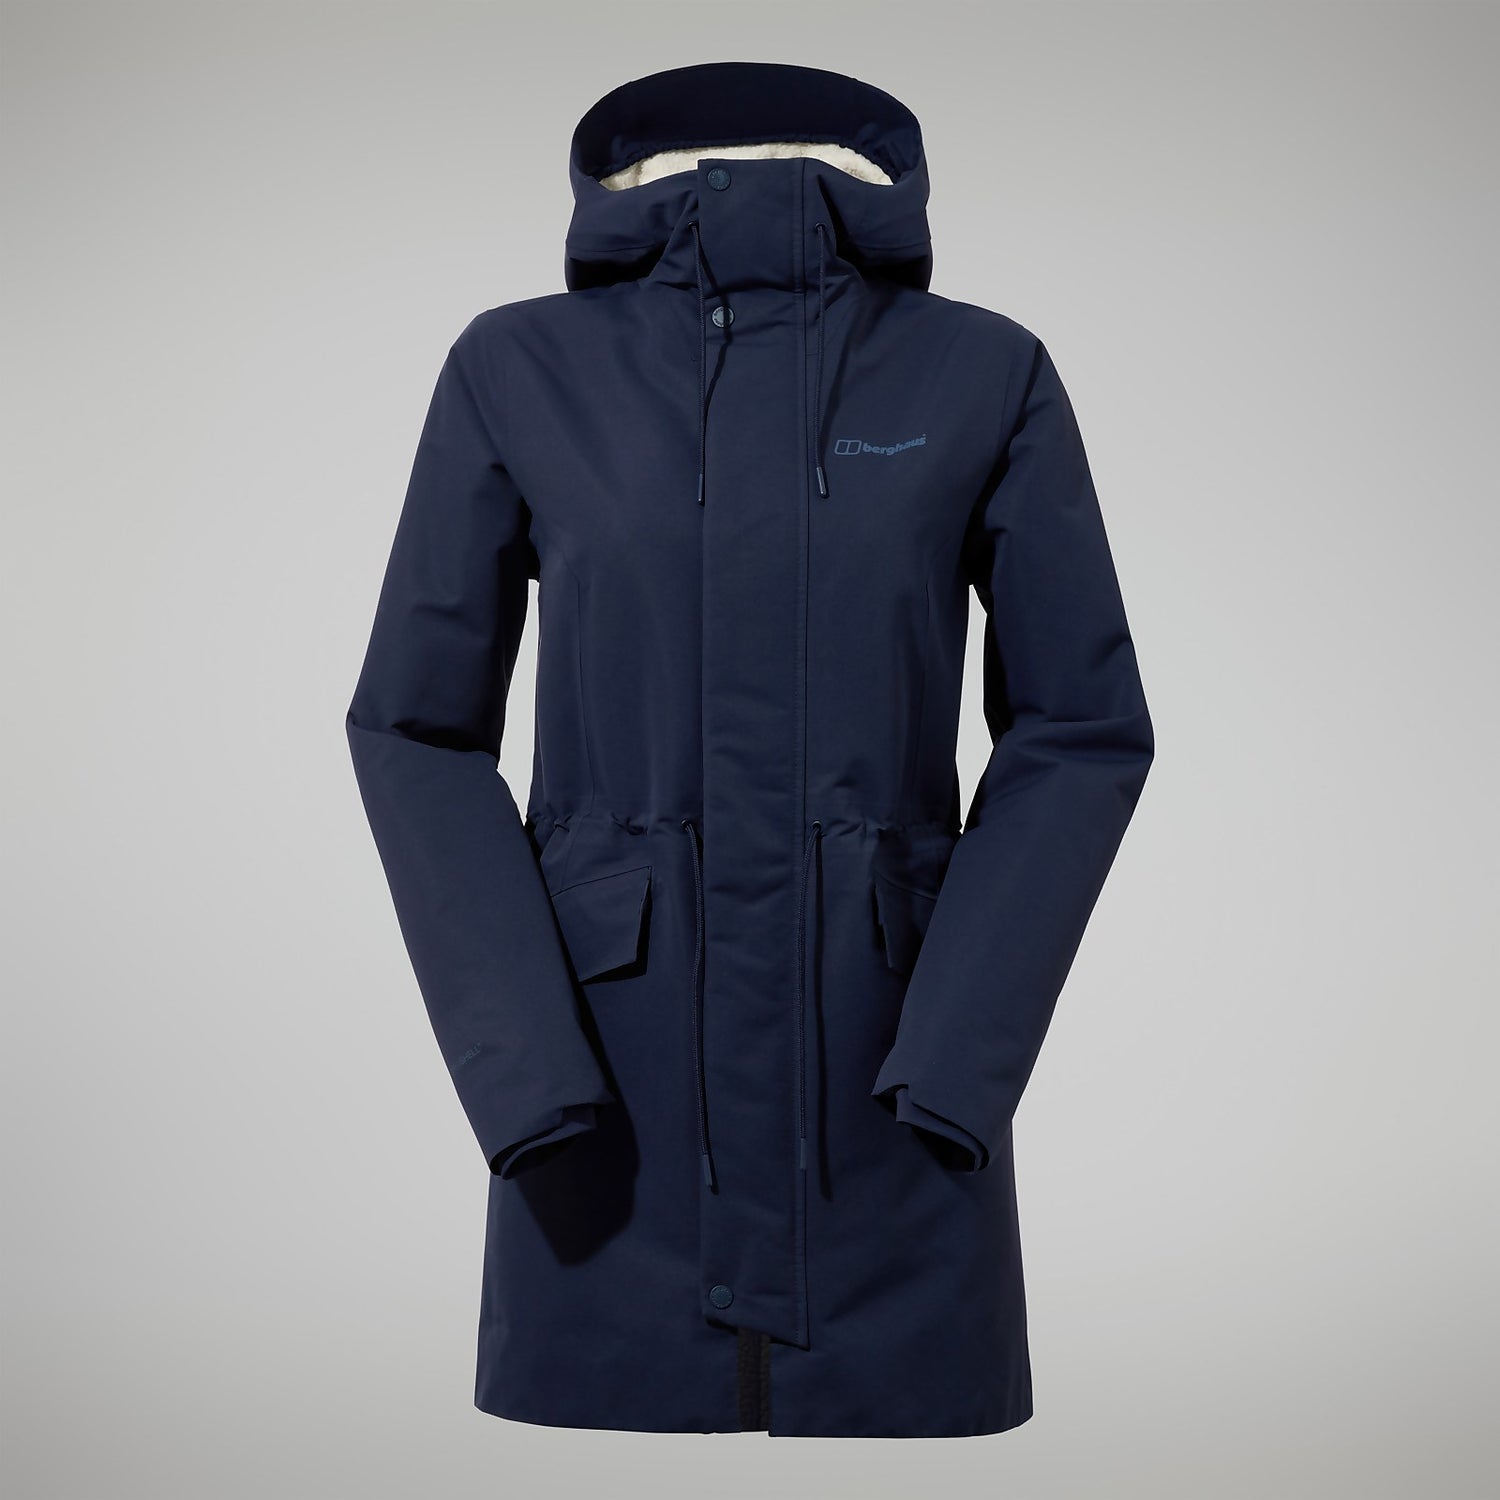 Unlock Wilderness' choice in the Berghaus Vs North Face comparison, the Foxghyll Hooded Parka by Berghaus